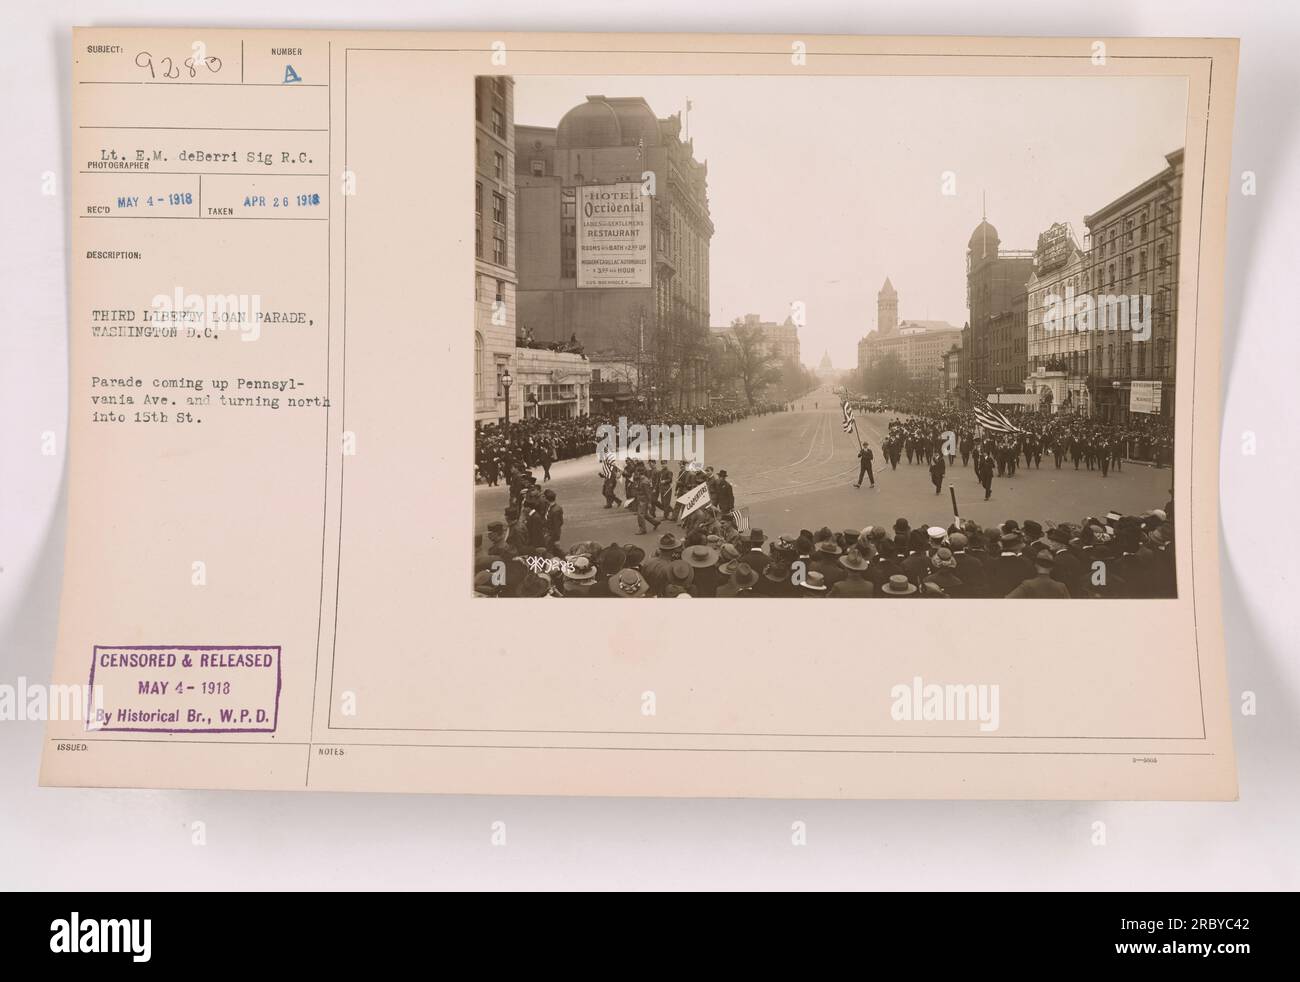 'Image captured on April 26, 1918, during the Third Liberty Loan Parade in Washington D.C. The photo shows the parade on Pennsylvania Ave, turning north into 15th St. Censored and released on May 4, 1918, by the Historical Branch of the War Plans Division. Notes mention the Hotel Occidental and restaurant.' Stock Photo